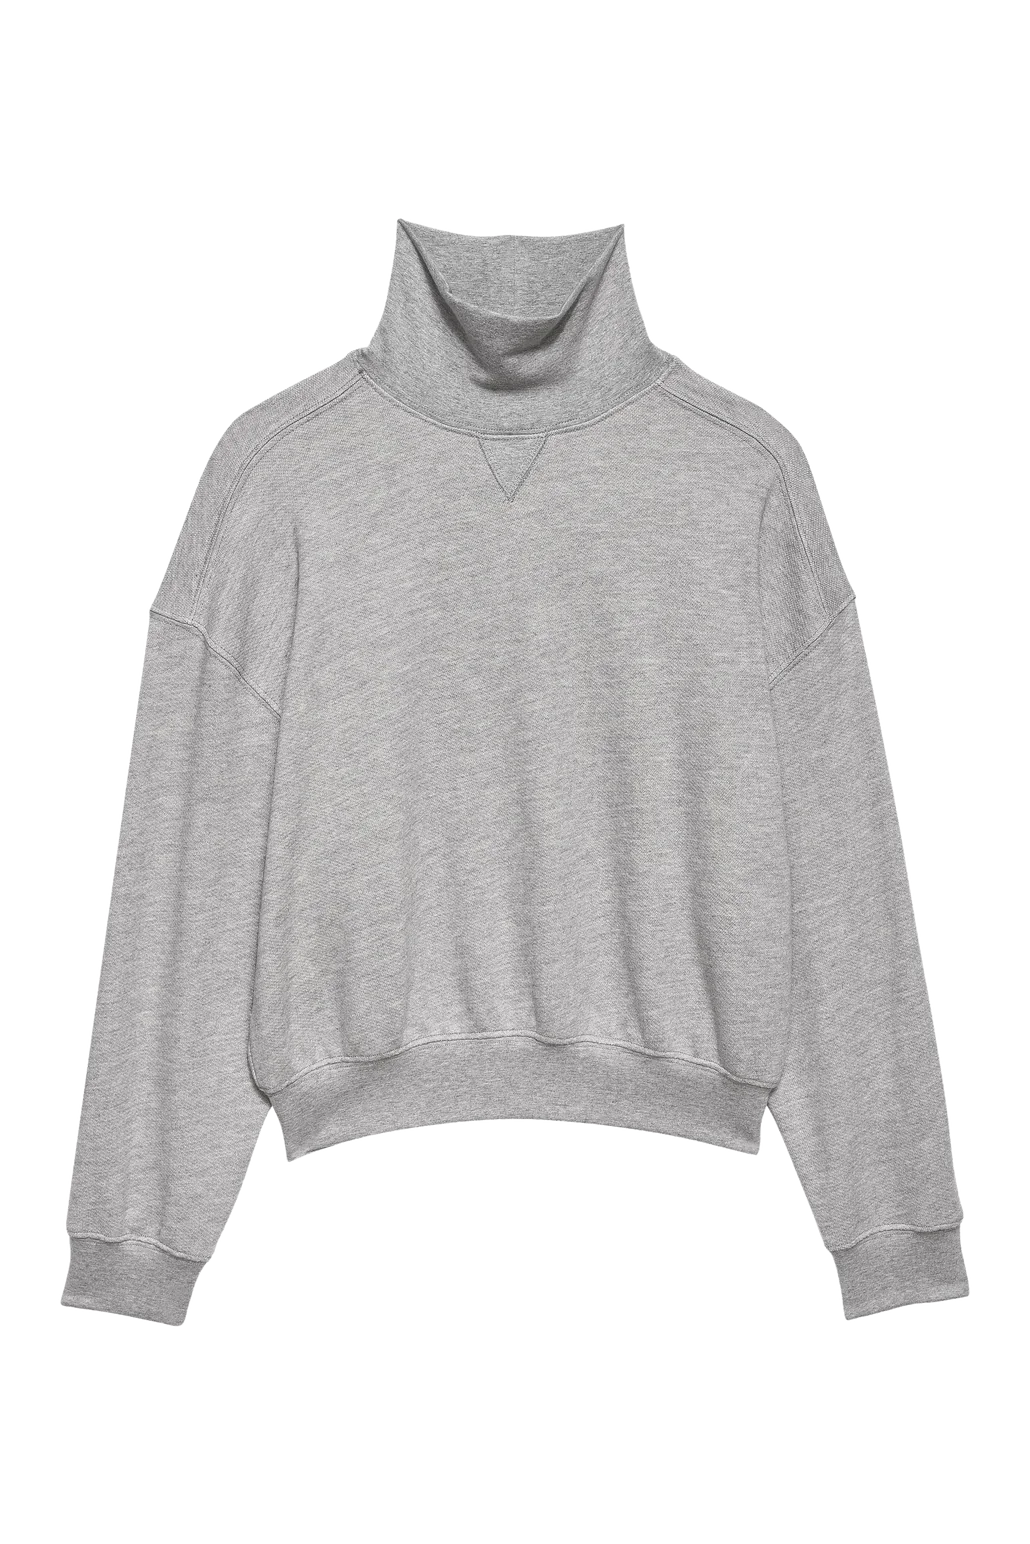 DONNI – Eco Terry Funnel Neck in Heather Grey